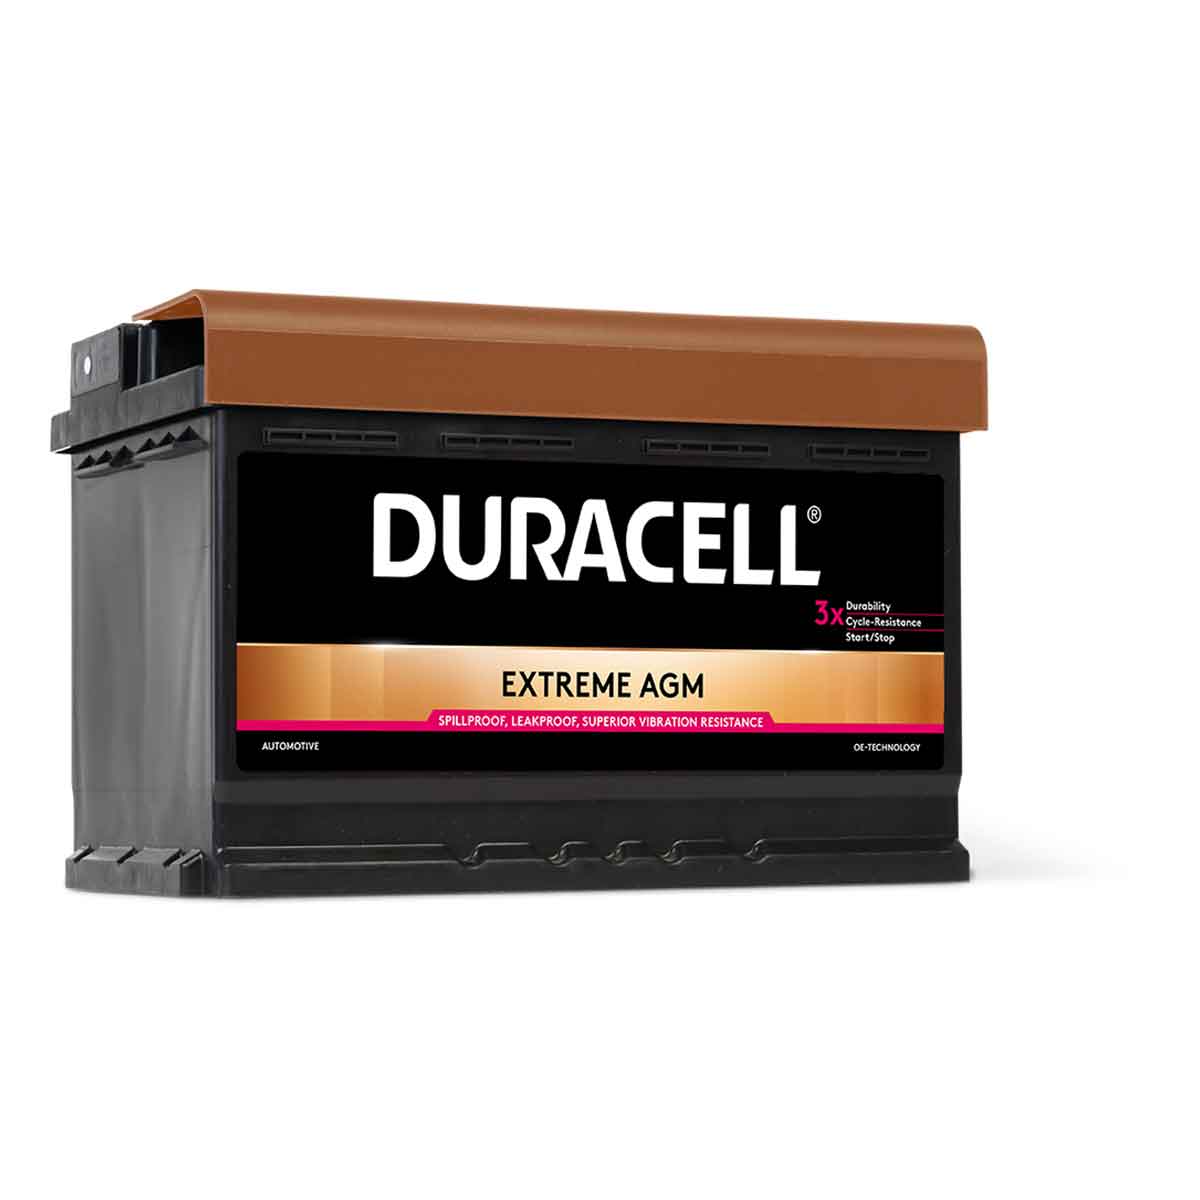 Duracell-Extreme-Battery.jpg